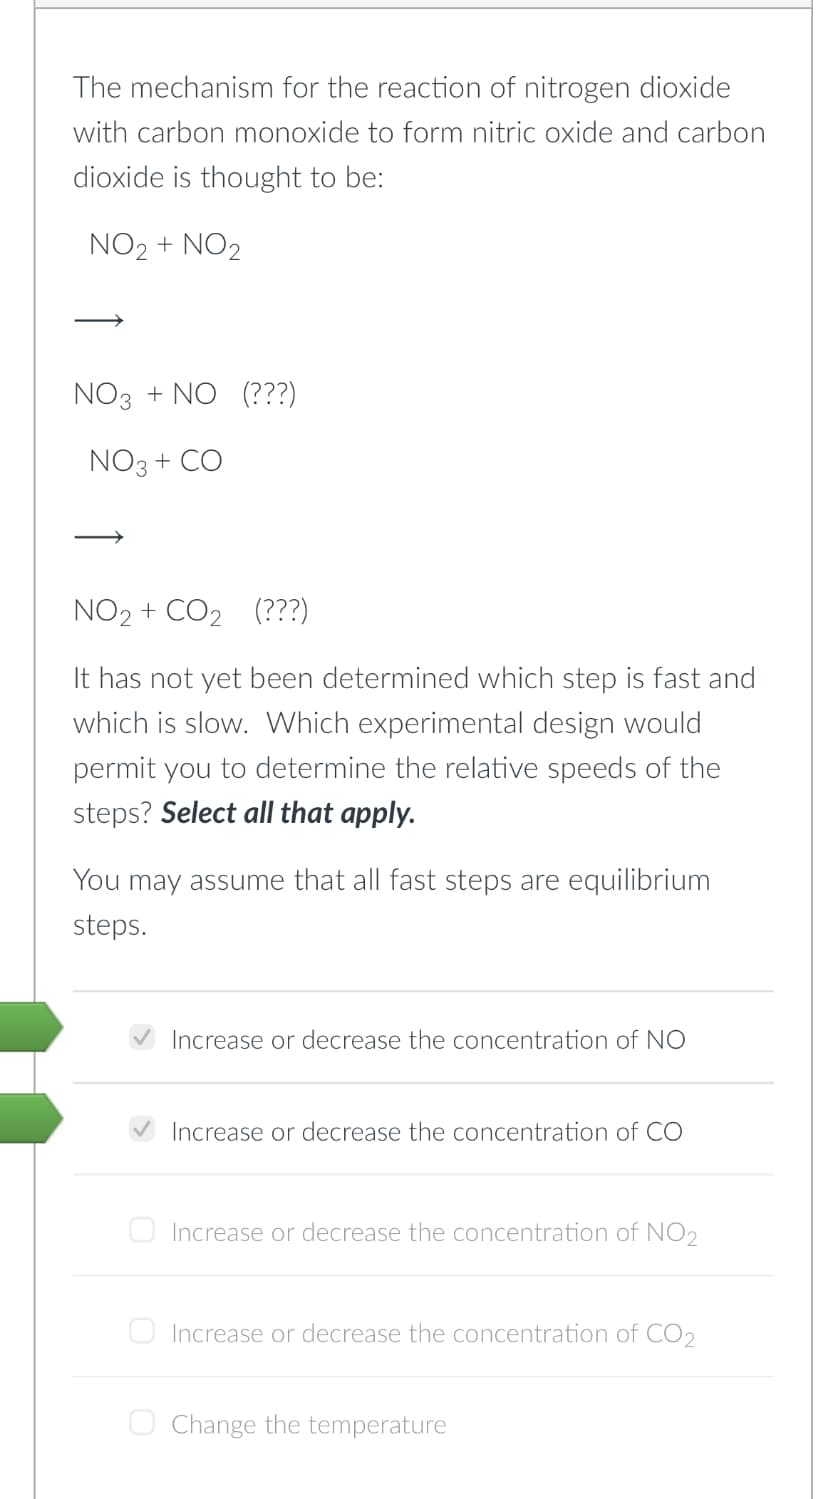 The mechanism for the reaction of nitrogen dioxide
with carbon monoxide to form nitric oxide and carbon
dioxide is thought to be:
NO₂ + NO2
NO3 + NO (???)
NO3 + CO
NO₂ + CO₂ (???)
It has not yet been determined which step is fast and
which is slow. Which experimental design would
permit you to determine the relative speeds of the
steps? Select all that apply.
You may assume that all fast steps are equilibrium
steps.
Increase or decrease the concentration of NO
Increase or decrease the concentration of CO
Increase or decrease the concentration of NO₂
Increase or decrease the concentration of CO2
Change the temperature